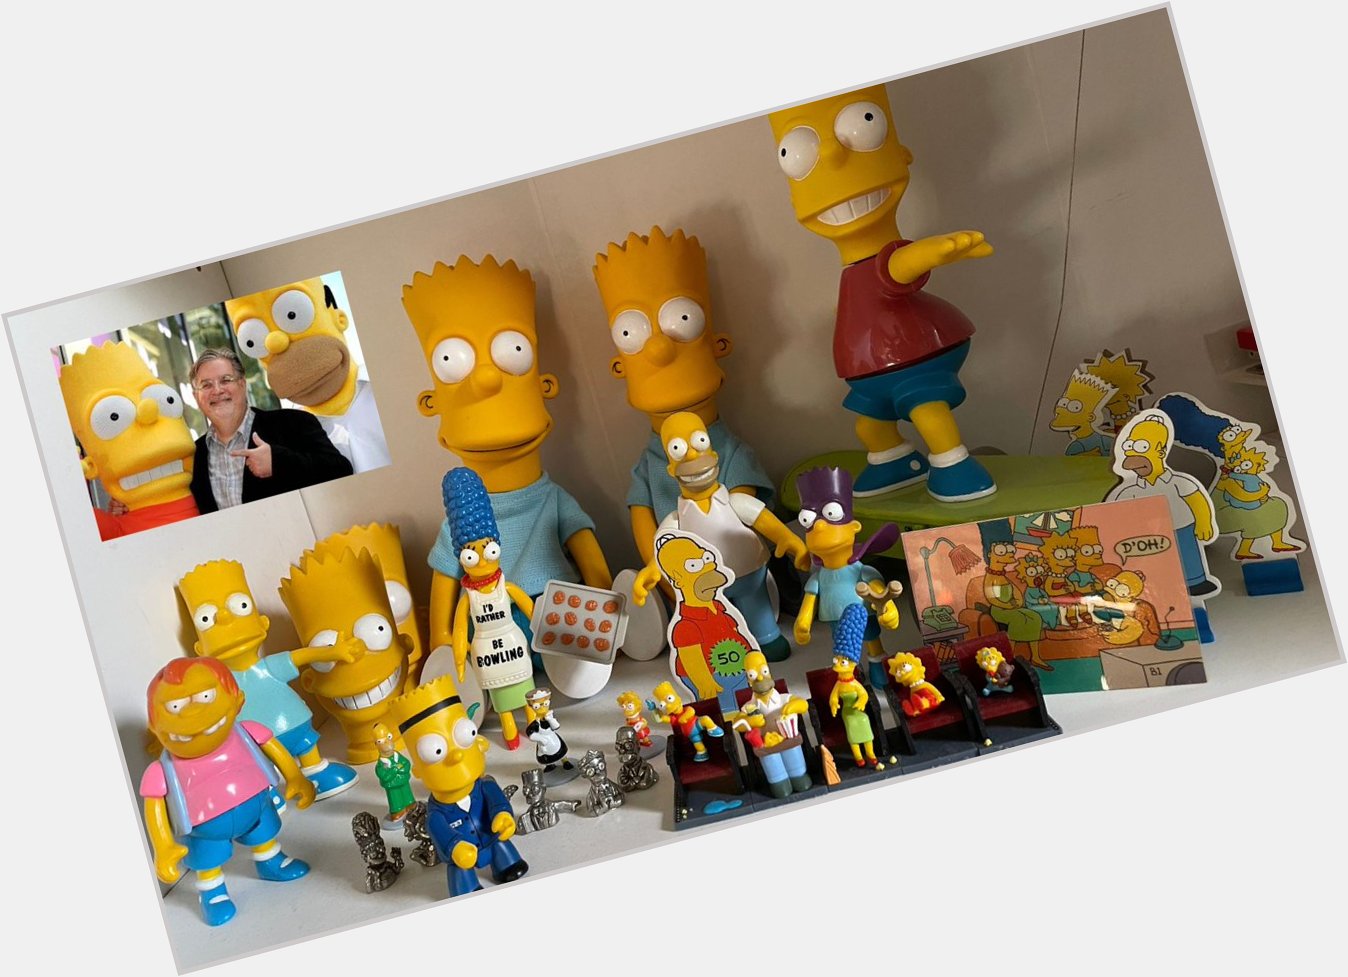 Happy Birthday Matt Groening! Thanks for all the laughs and all the merch.   